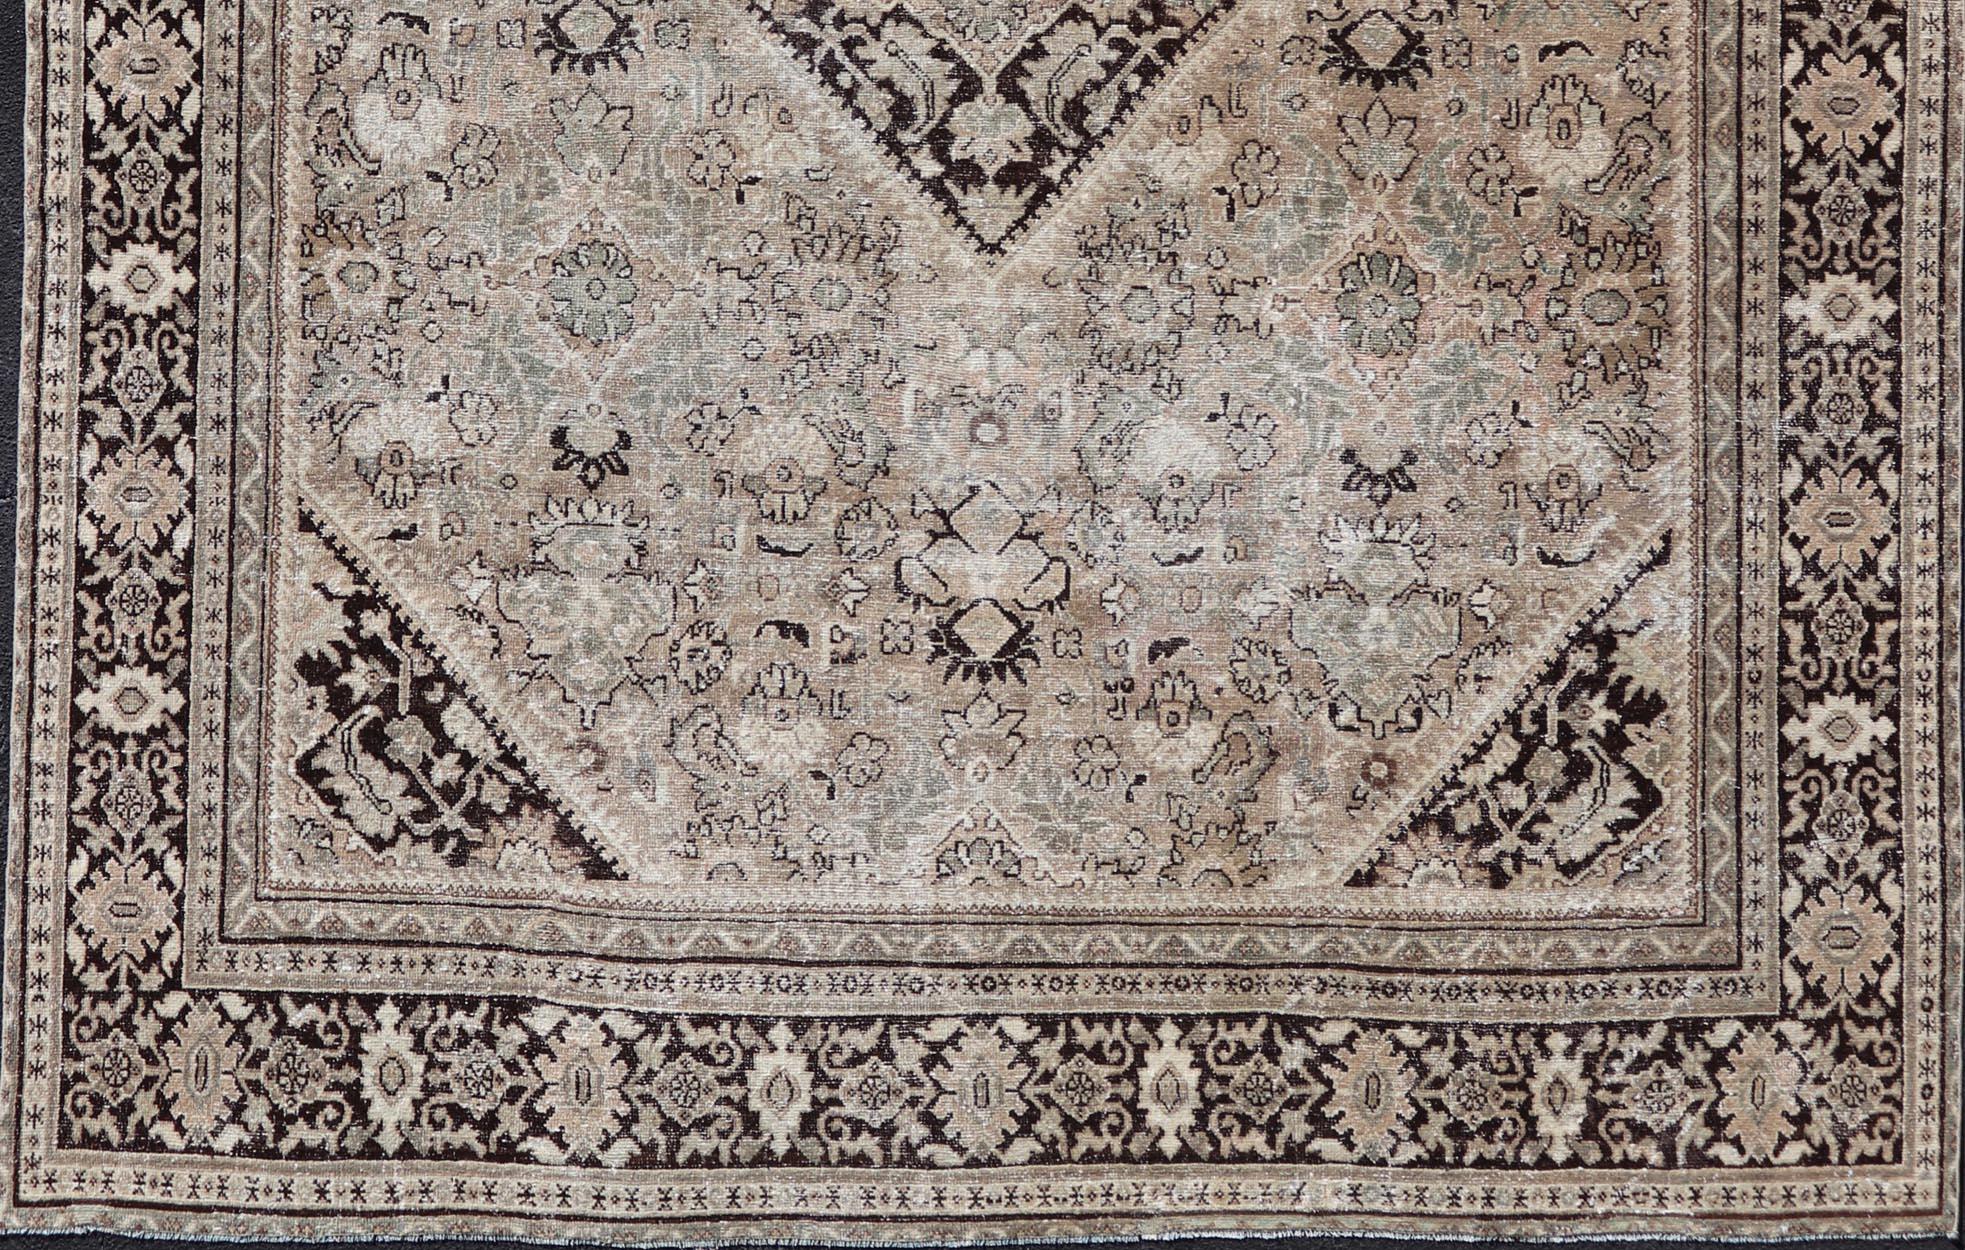 Antique hand knotted Sultanabad-Mahal rug in brown, tan, taupe and cream, Keivan Woven Arts / rug PTA-200713, country of origin / type: Persian / Sultanabad, circa Early-20th Century.

Measures: 10'5 x 13'4.